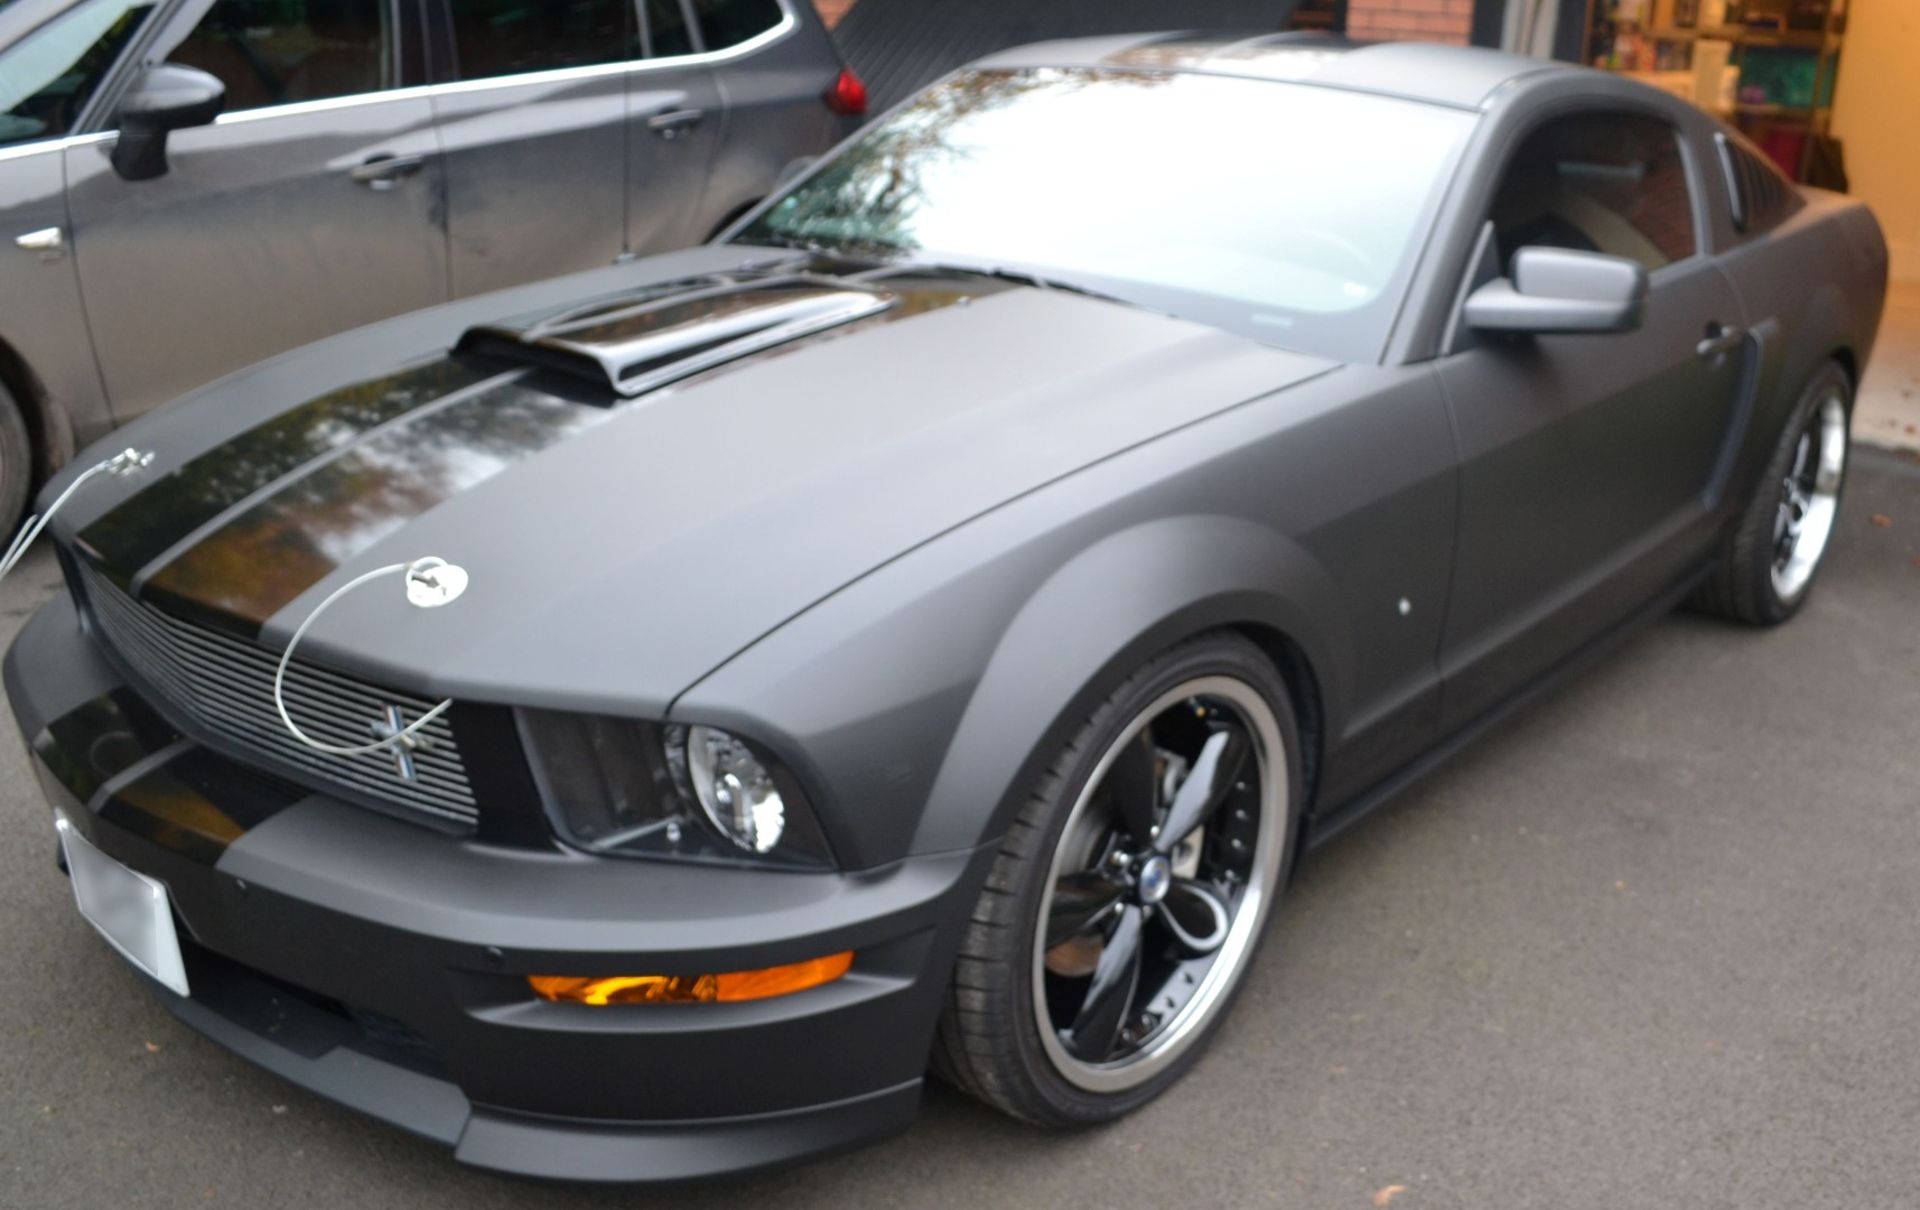 Limited Edition Supercharged 2008 Shelby Ford Mustang GT-C - 2136 Miles - No VAT on the hammer - Image 15 of 64